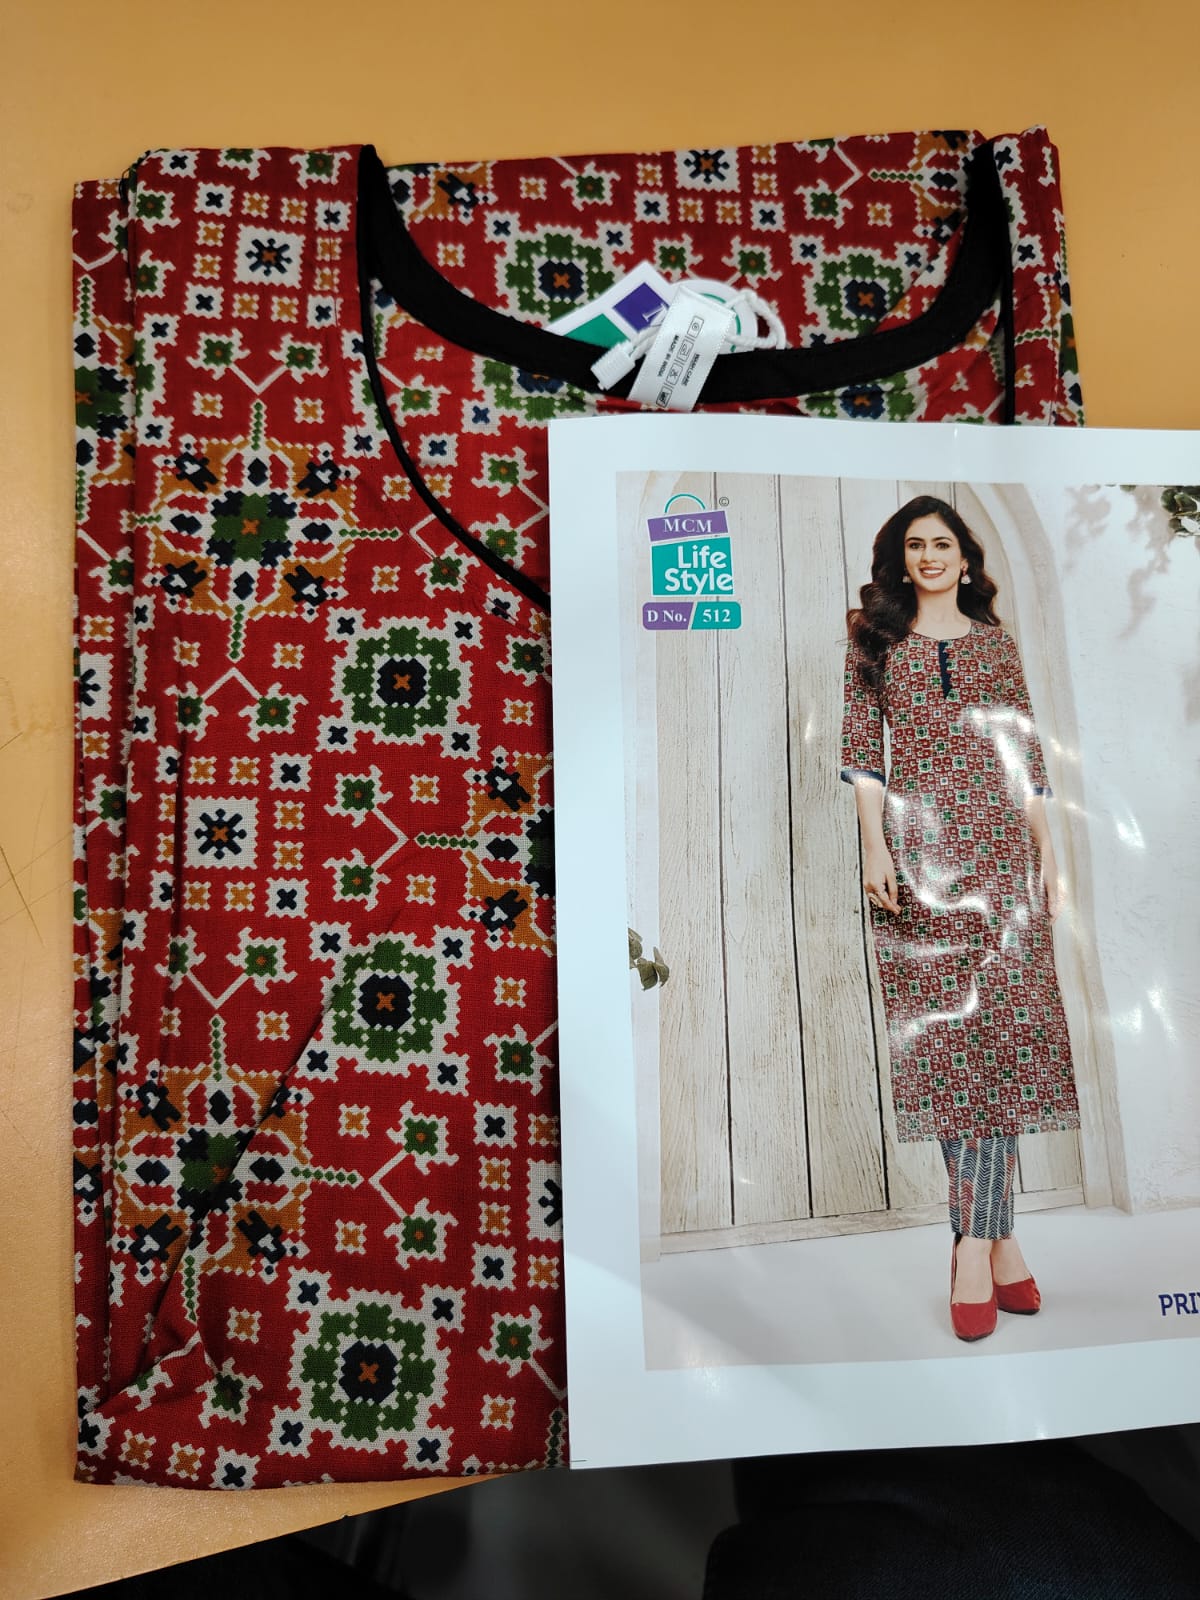 COTTON SHORTIES VOL 03 BY TIPS & TOPS BRAND LAUNCH COTTON PRINTS FANCY  SHORT TOPS WITH STITCHING PATTERNS -WHOLESALER AND DEALER